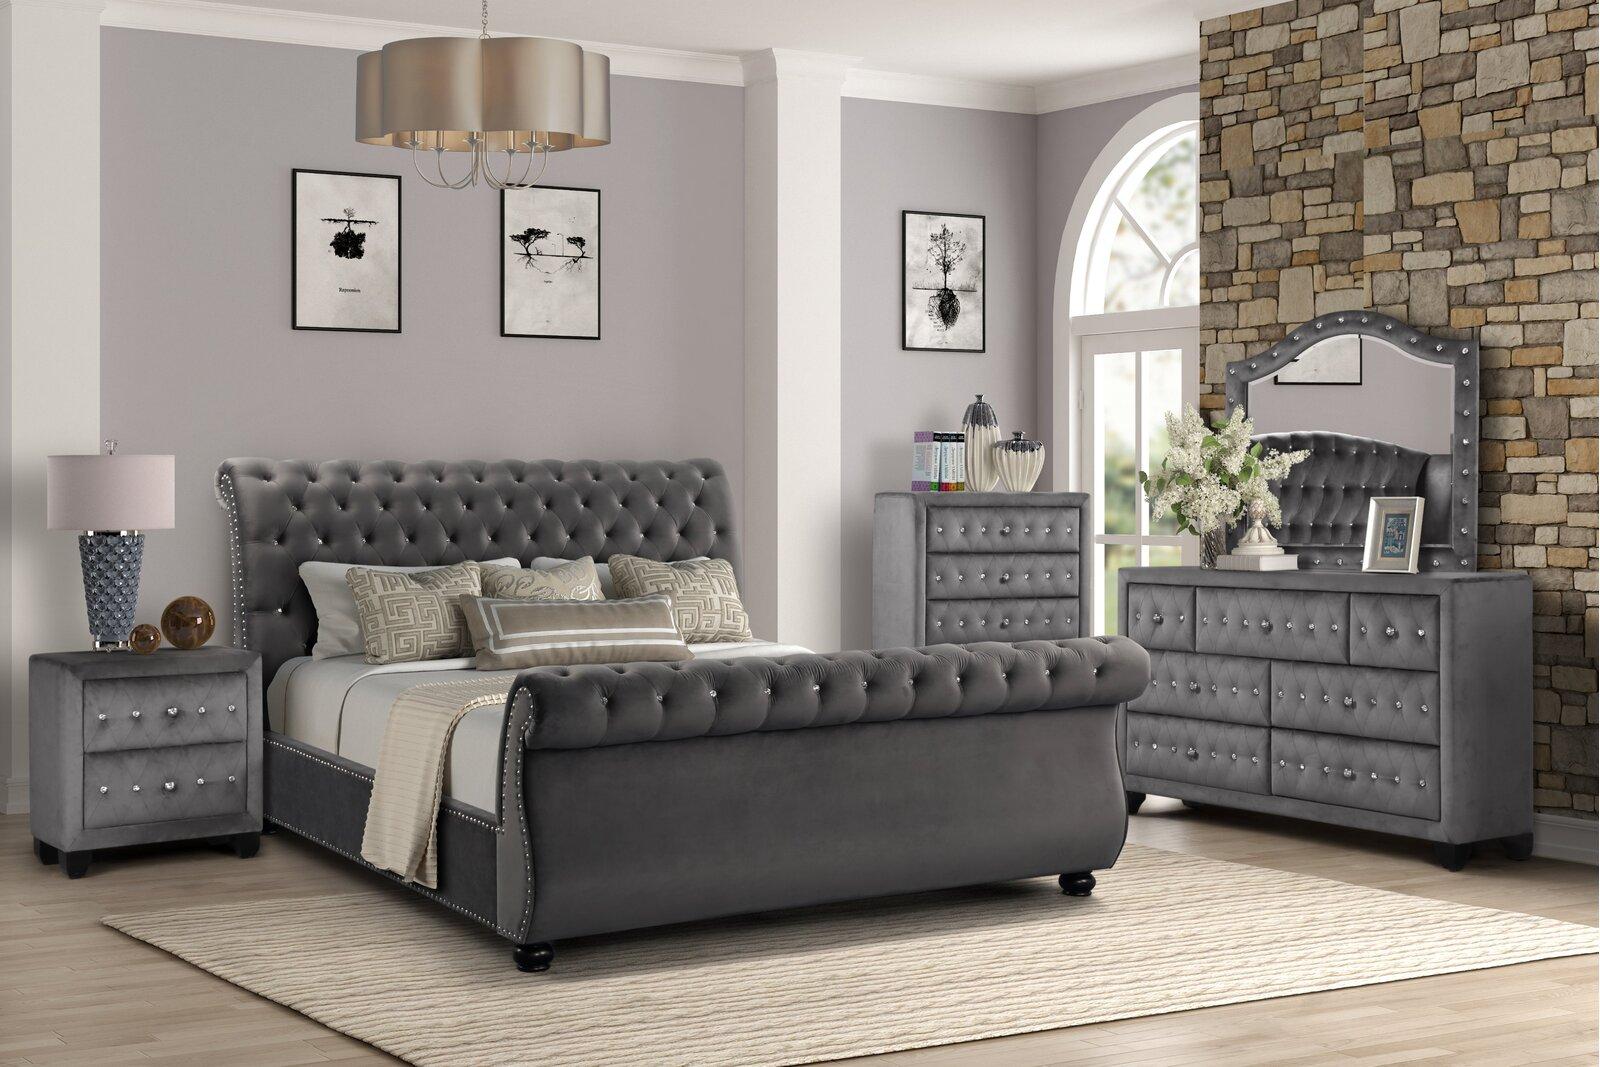 Contemporary, Modern Sleight Bedroom Set KENDALL GHF-808857701923-Set-4 in Gray 